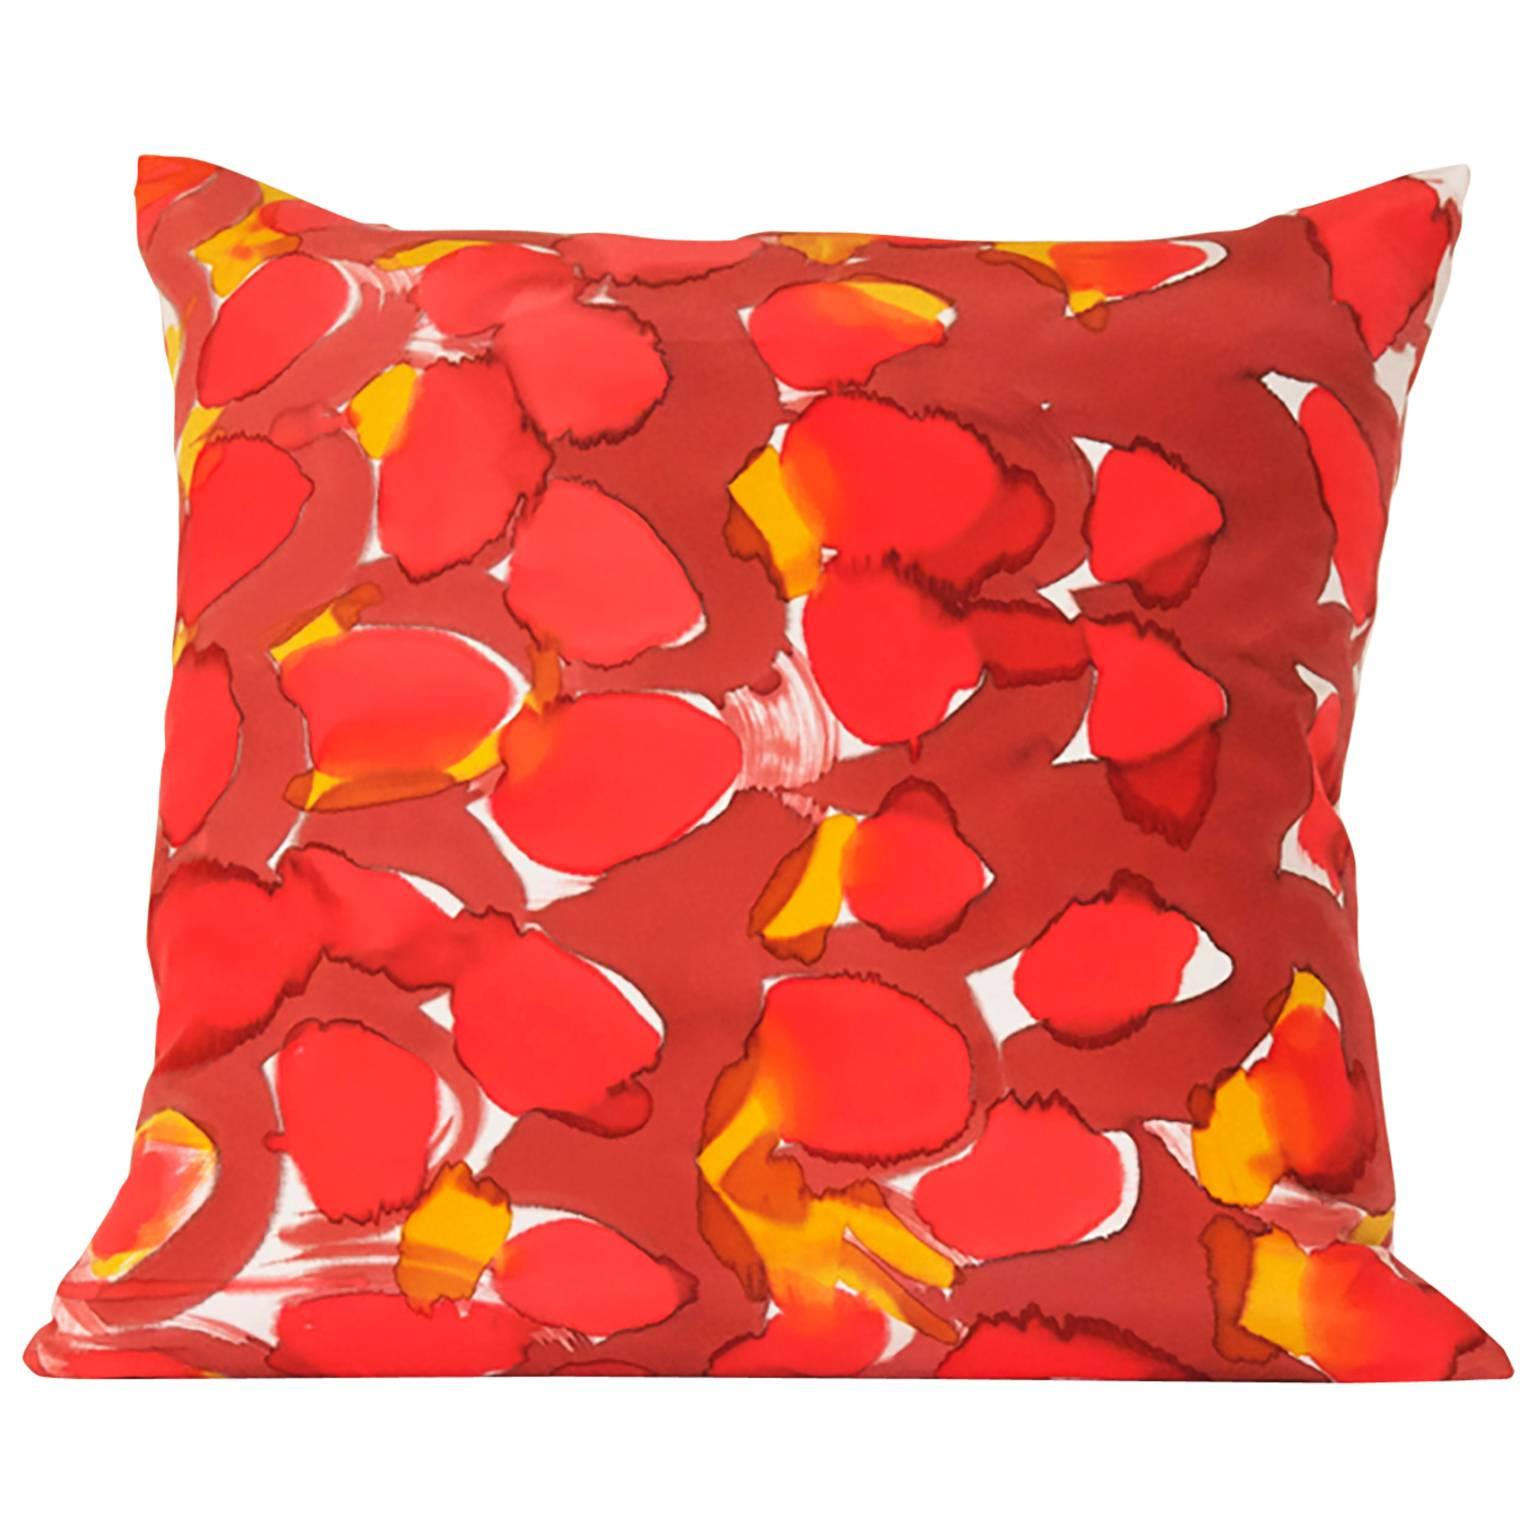 Hand Painted Red Scales Square Silk Charmeuse Pillow For Sale